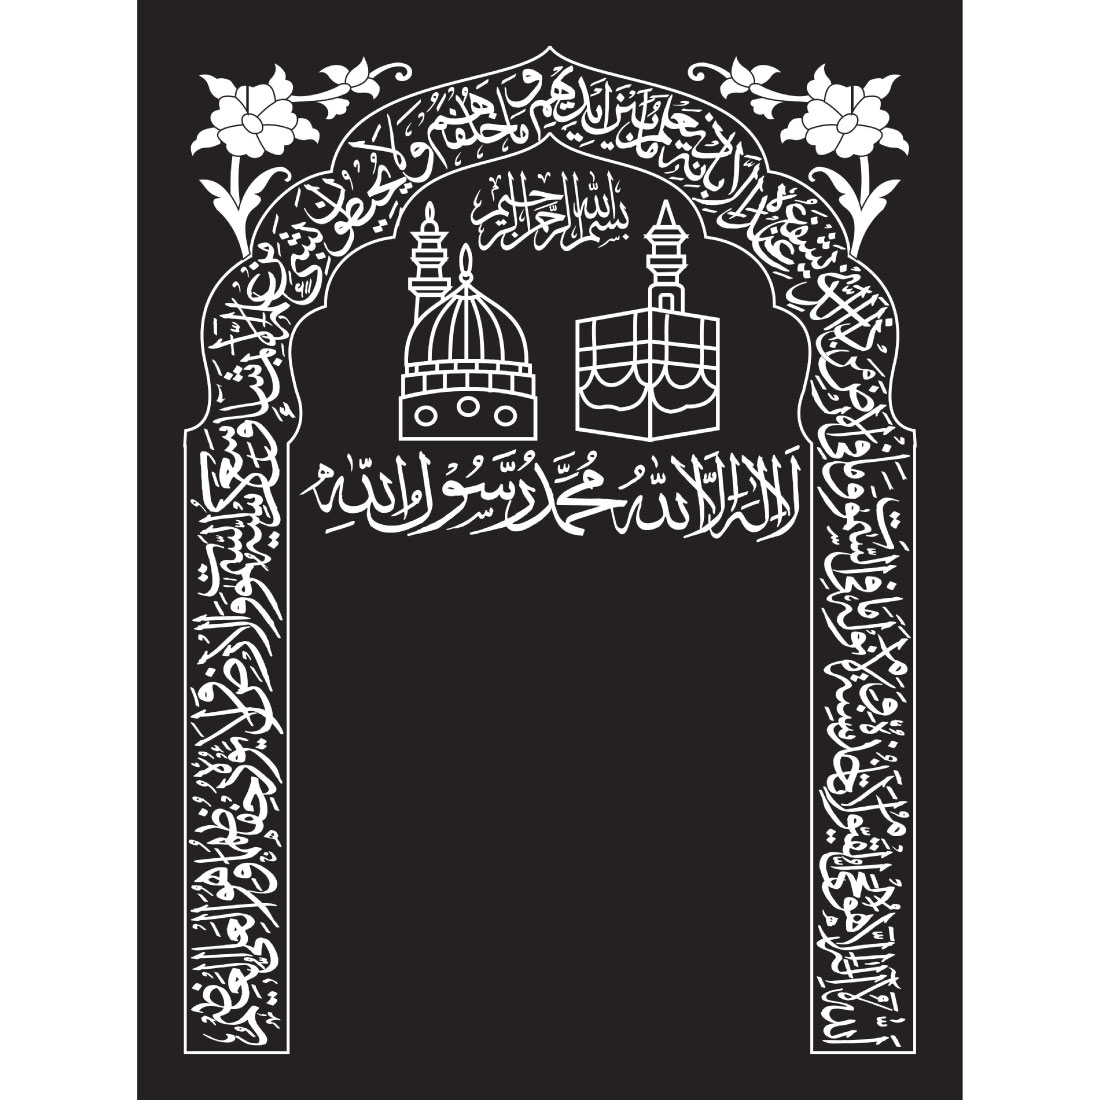 AYAT-UL-KURSY ISLAMIC CALLIGRAPHY FOR 32$ ONLY cover image.